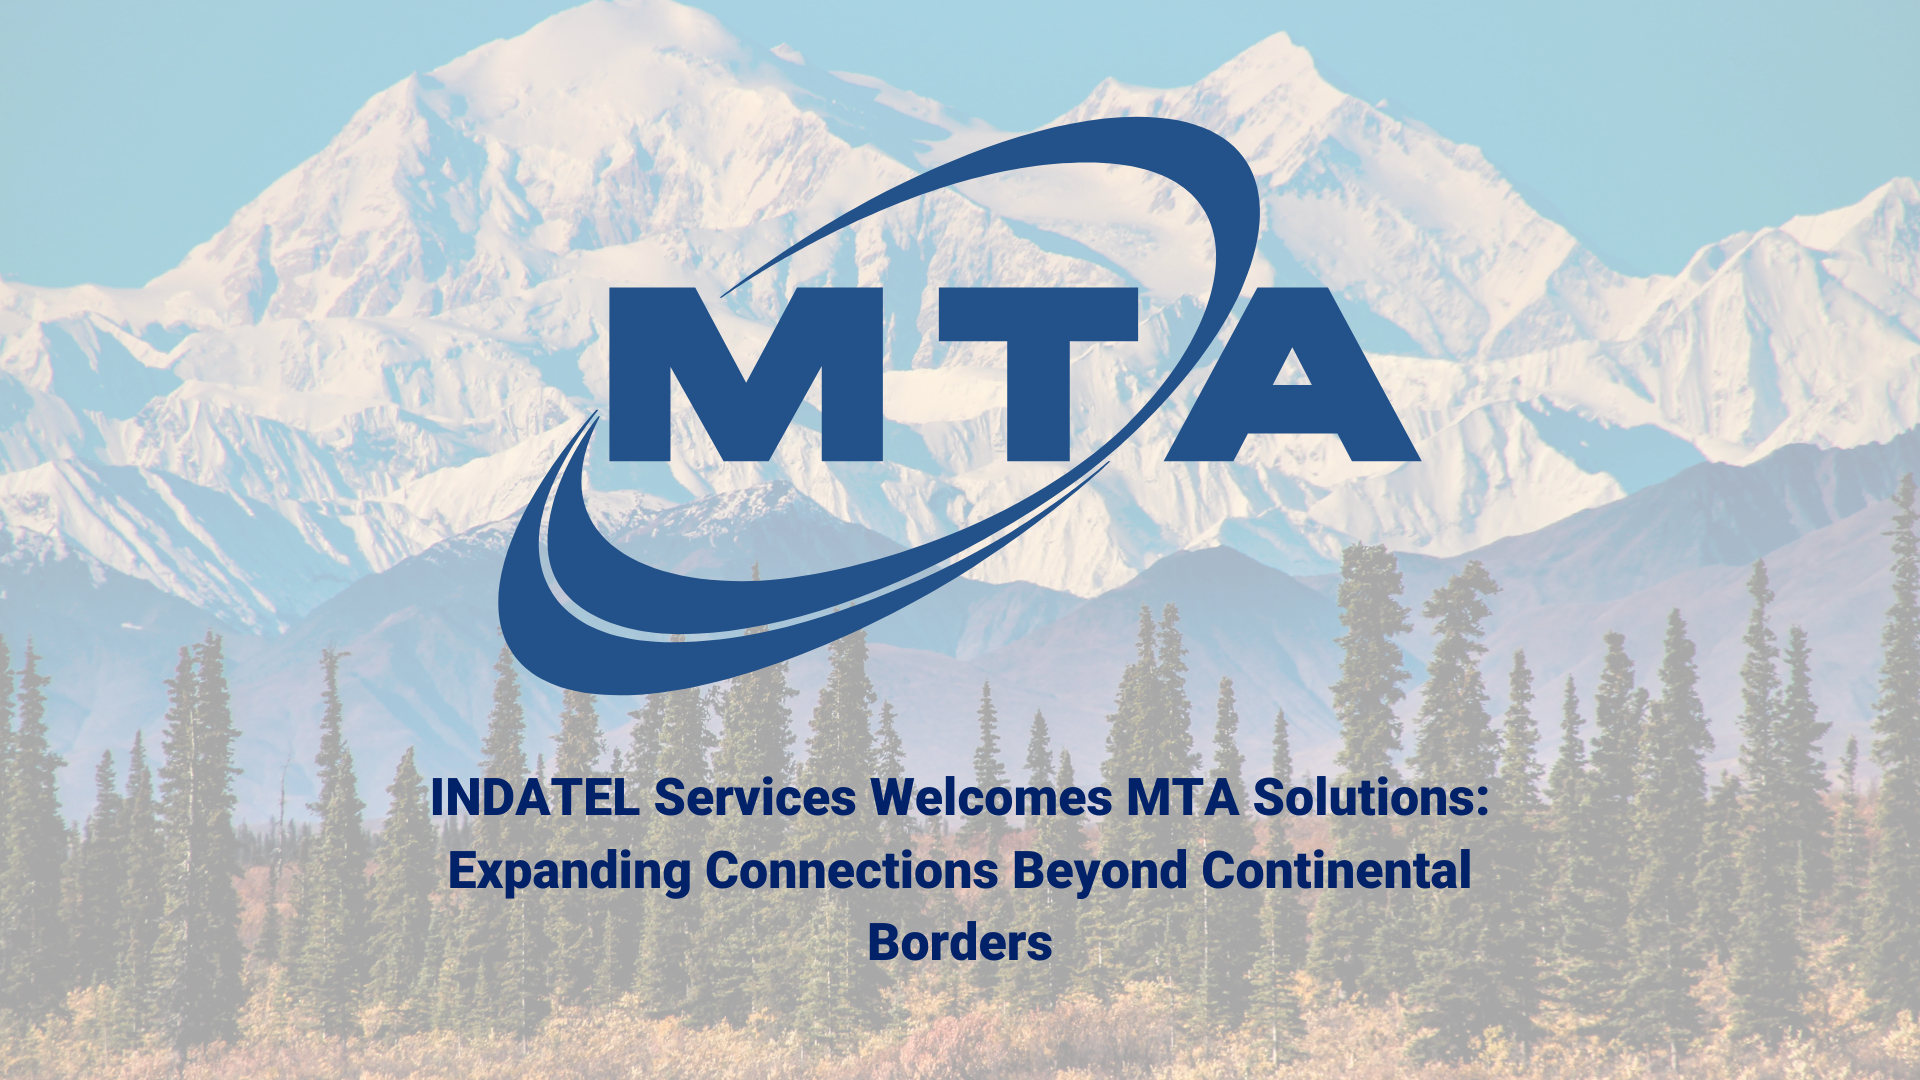 INDATEL Welcomes MTA Solutions: Expanding Connections Beyond Continental Borders image